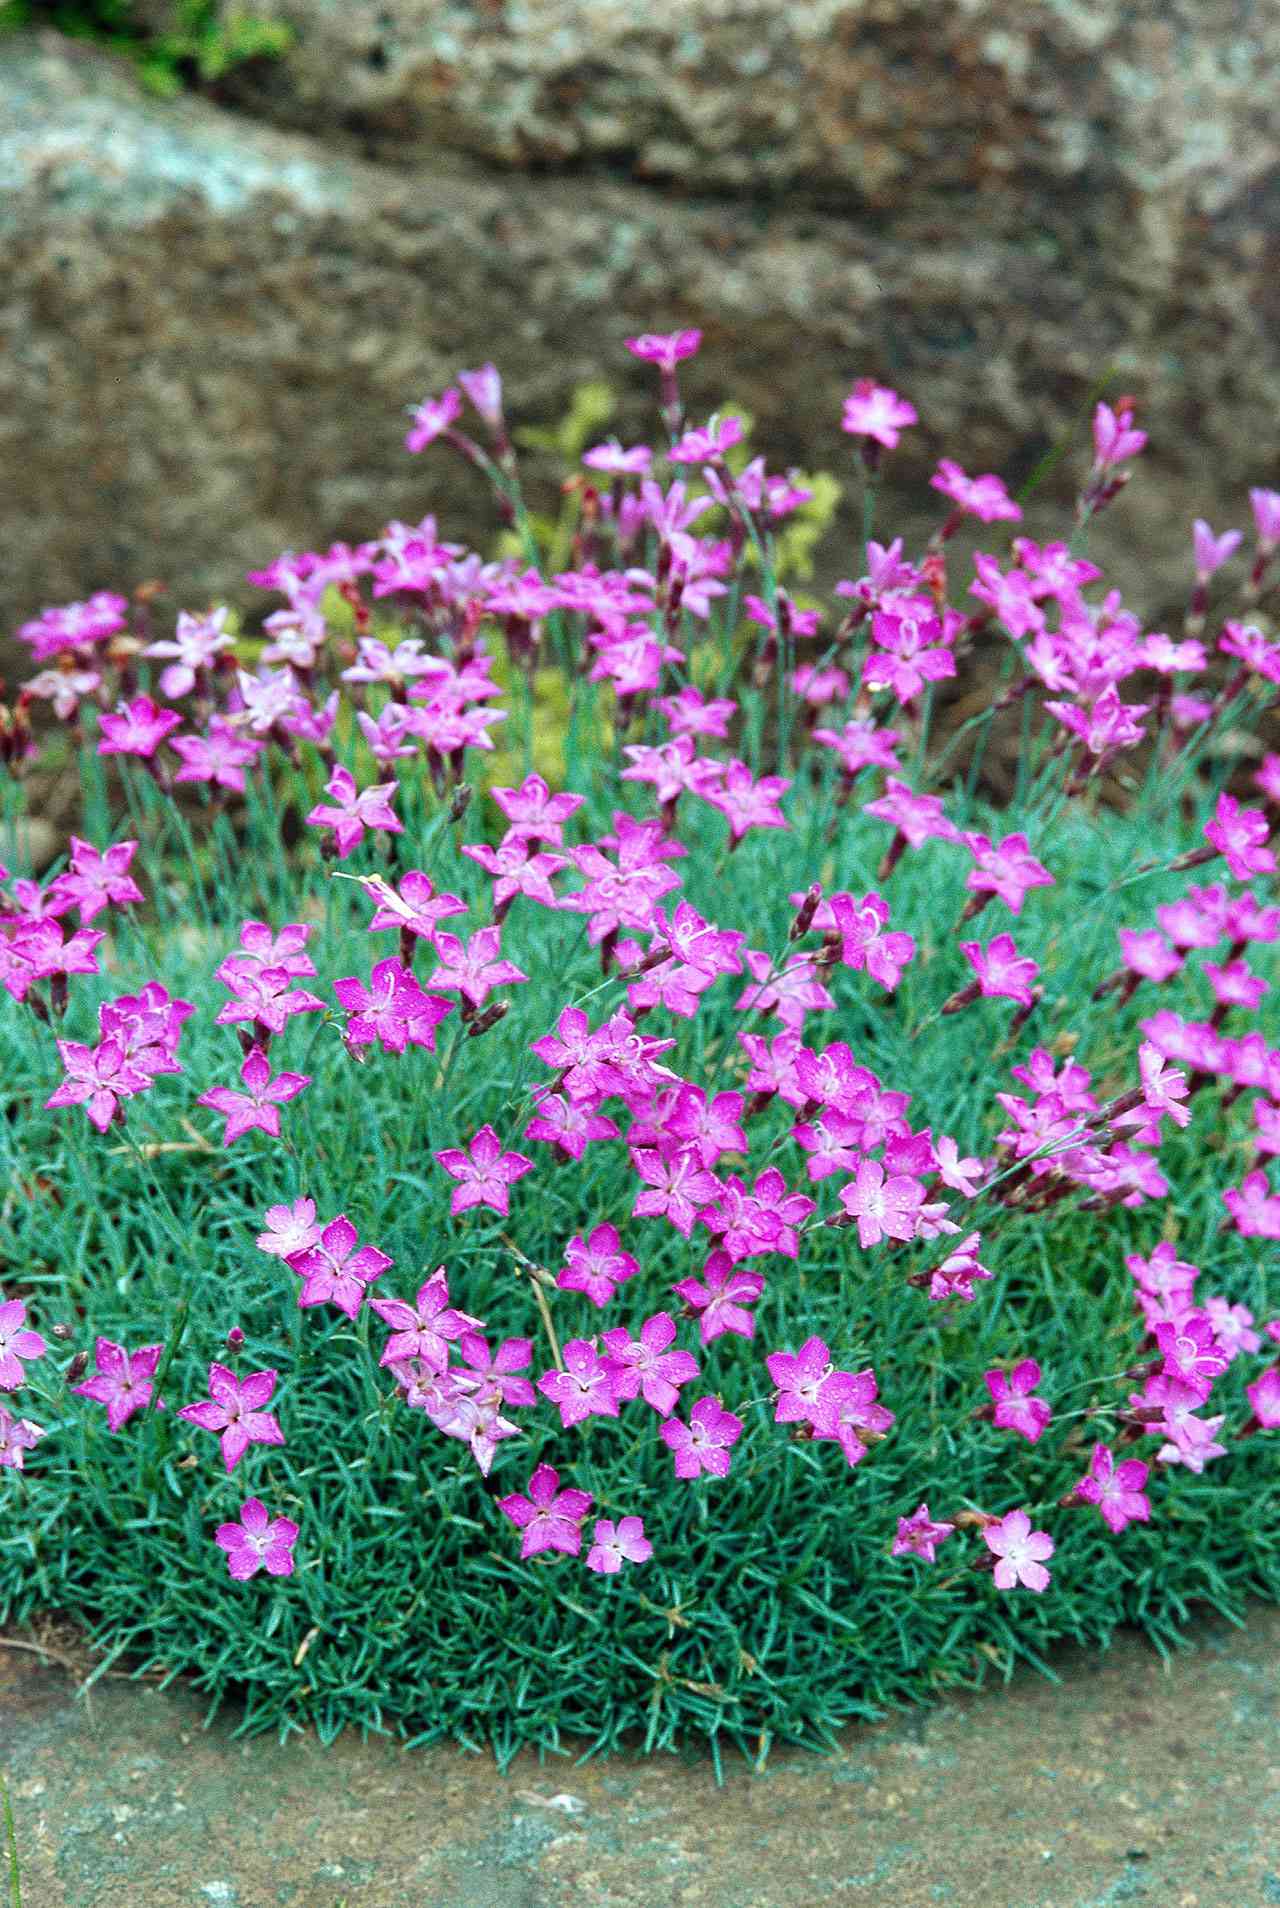 Drought Tolerant Groundcovers Better, Fast Growing Ground Cover For Sunny Slopes